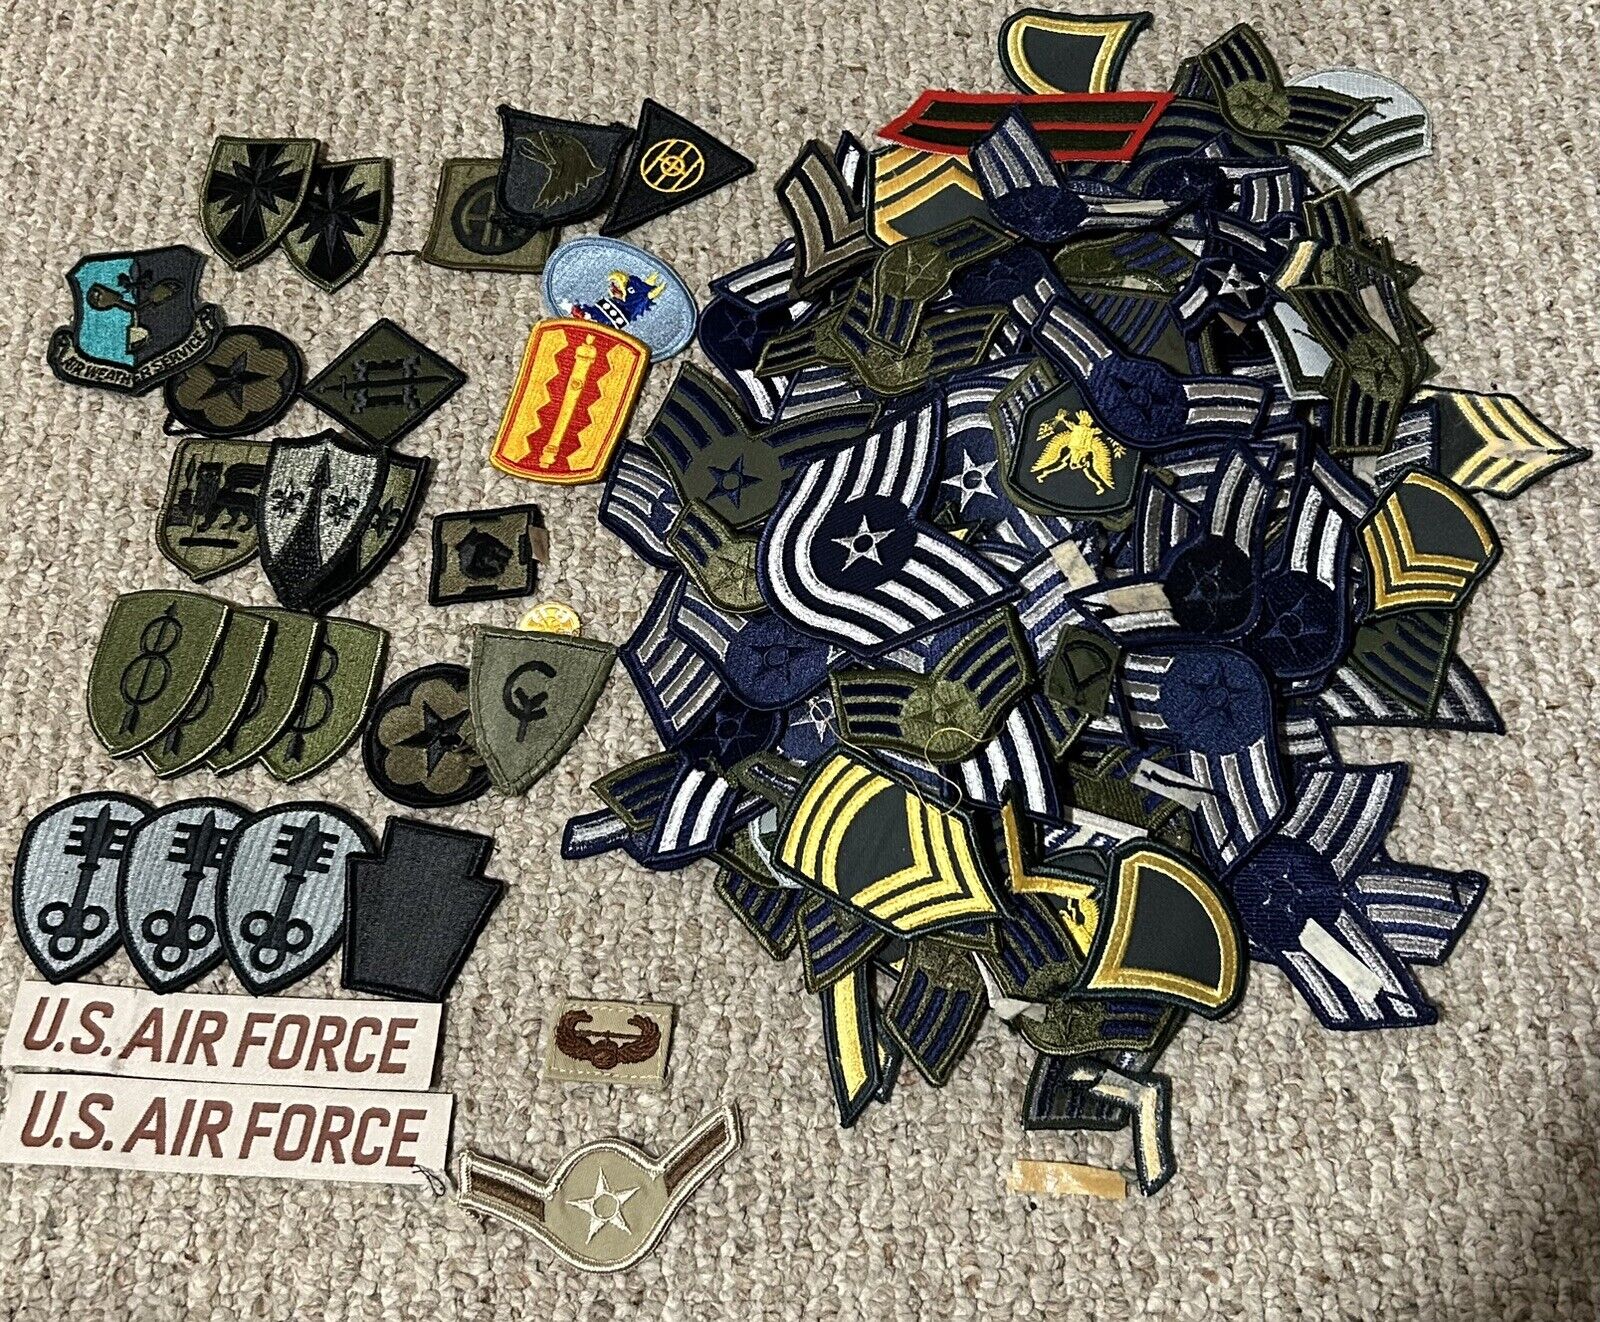 HUGE LOT OF MILITARY PATCHES ARMY AIR FORCE Over 100 RANK STRIPES ARTILLERY